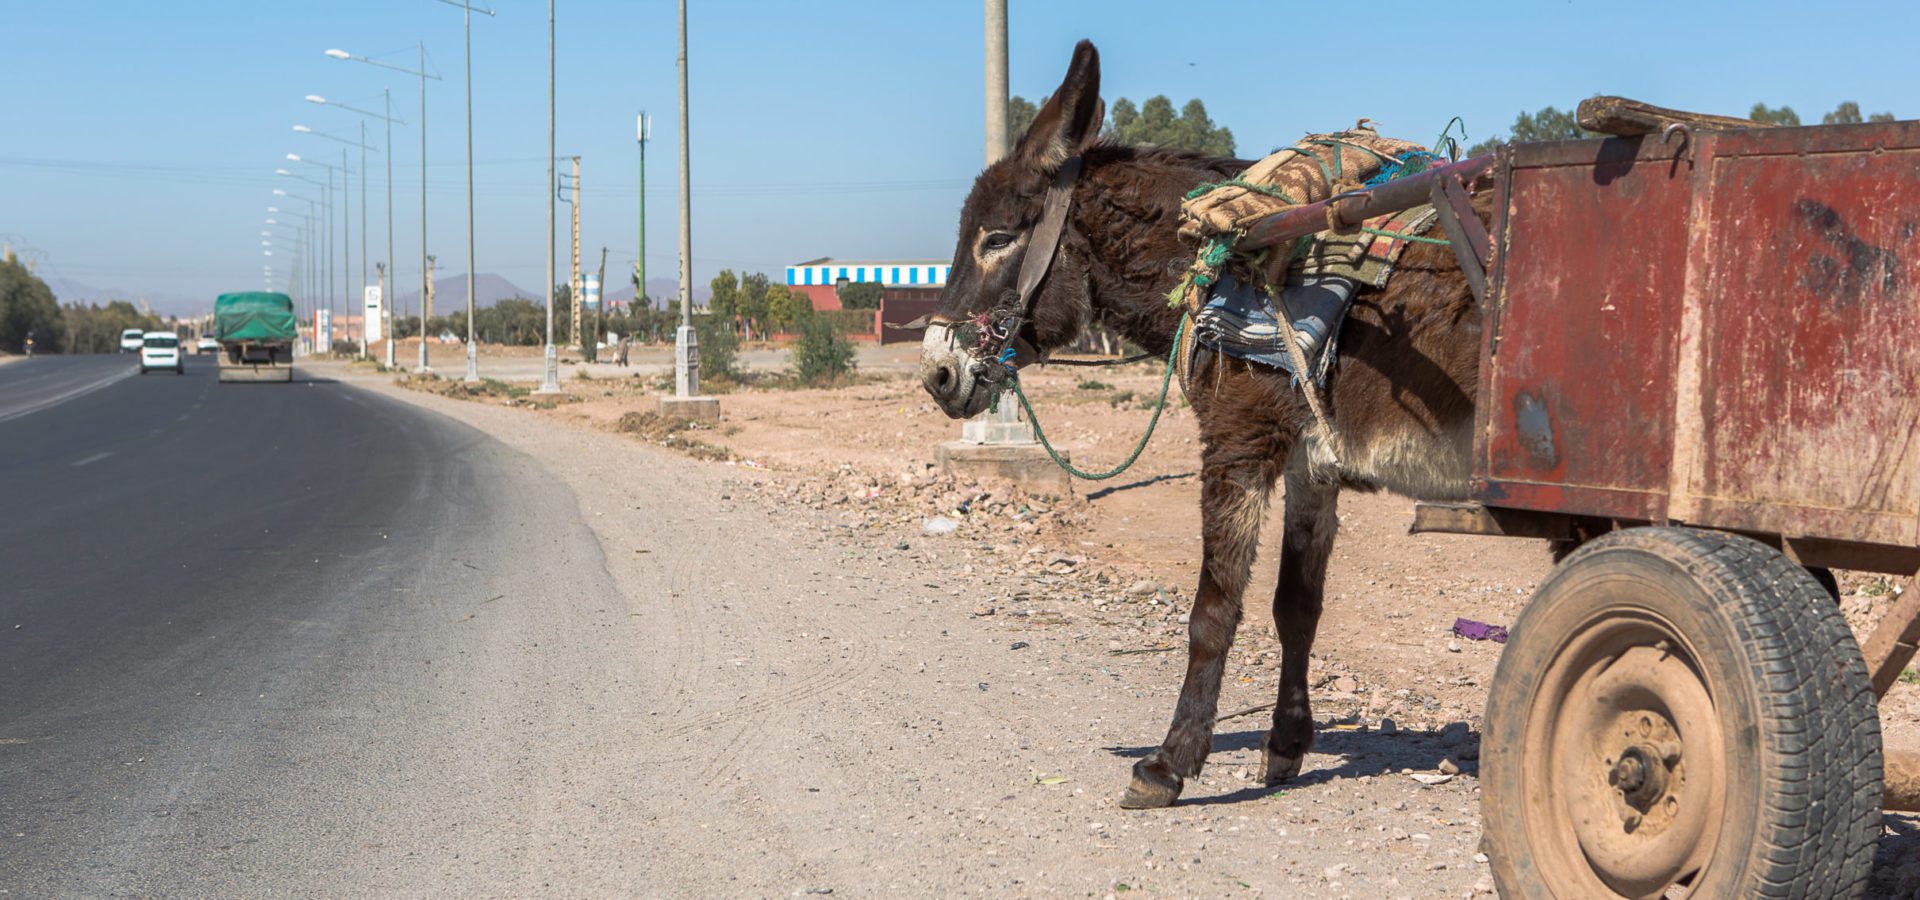 Working donkey carrying cart on road